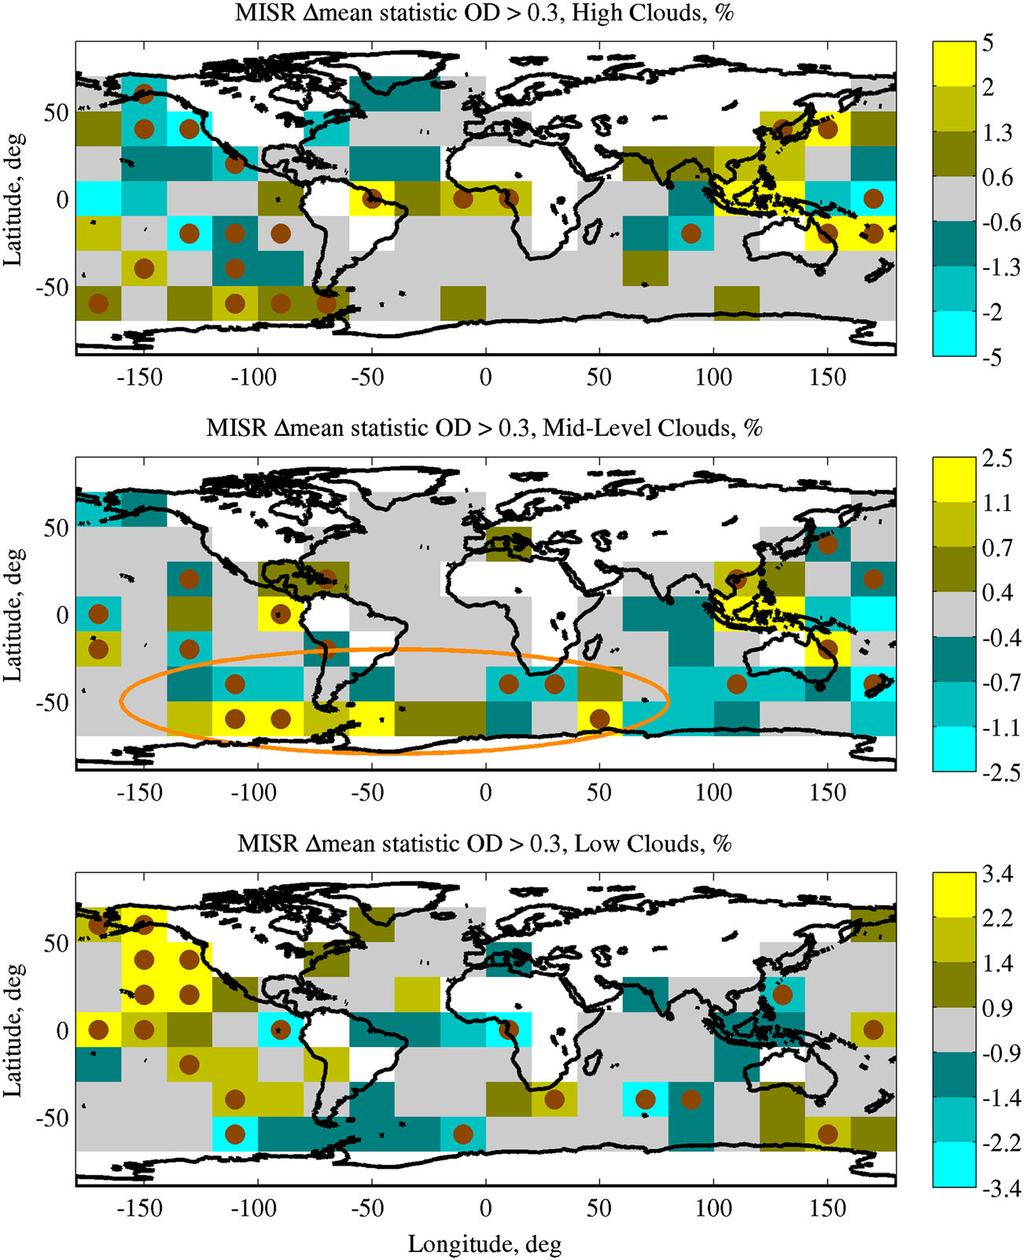 Figure 6. Global distribution of Δmean statistic for high (CTH > 7 km), middle (7 > CTH > 3 km), and low (CTH < 3 km) clouds. Includes all clouds with an OD > 0.3. Orange oval in middle panel highlights apparent shift in midlevel clouds (see text for explanation).